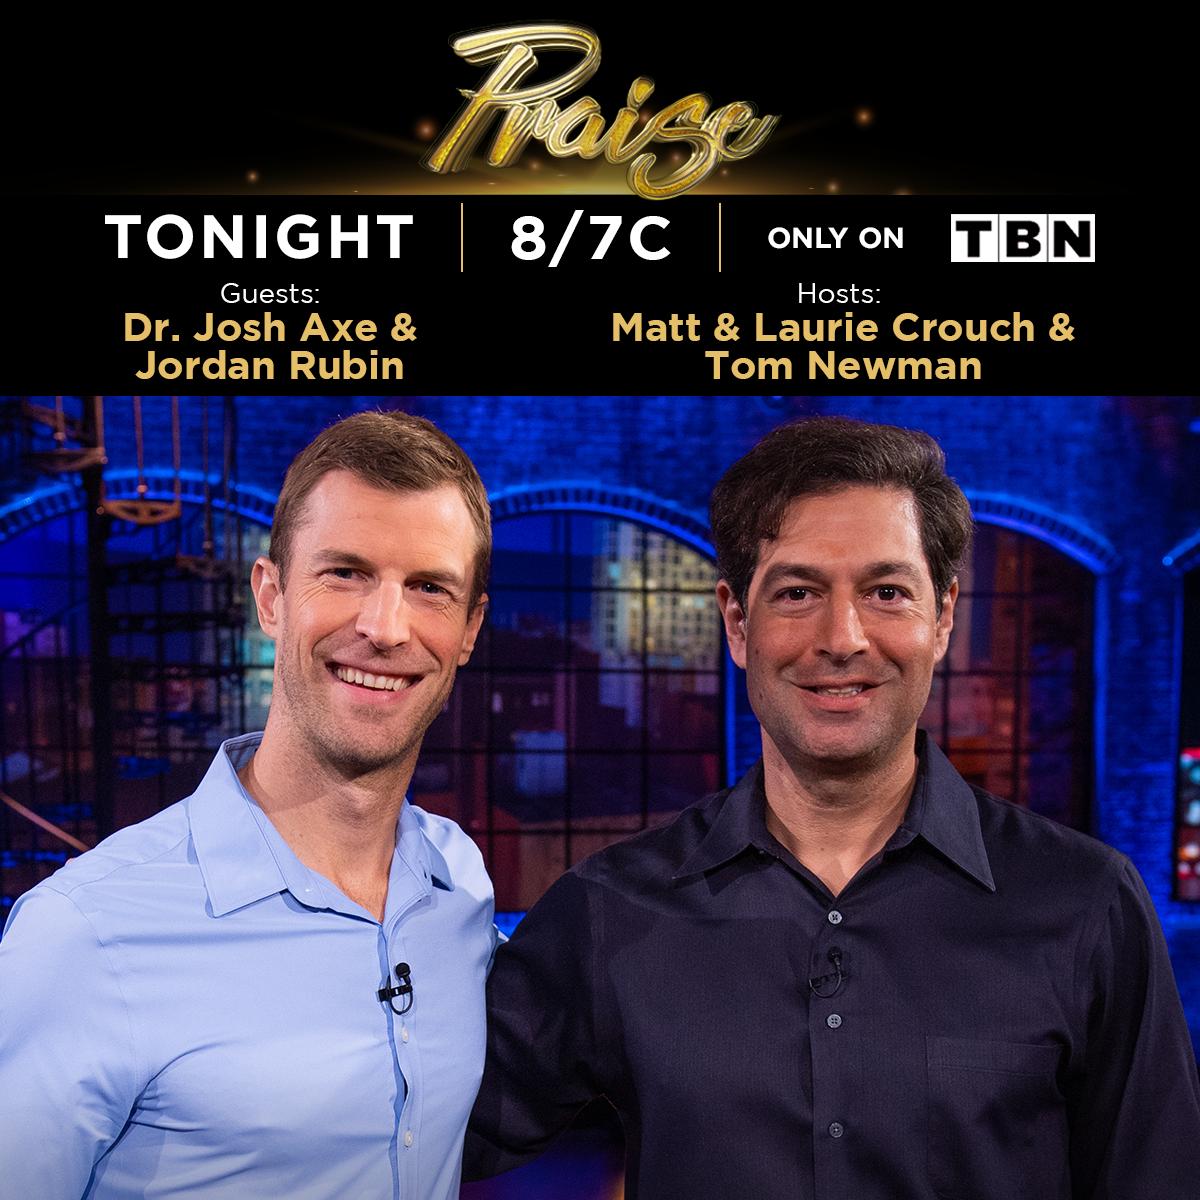 TBN on "Learn to live a healthier life - both physically and spiritually - the experts. Josh Axe and Rubin join hosts Matt & Laurie Crouch and Tom